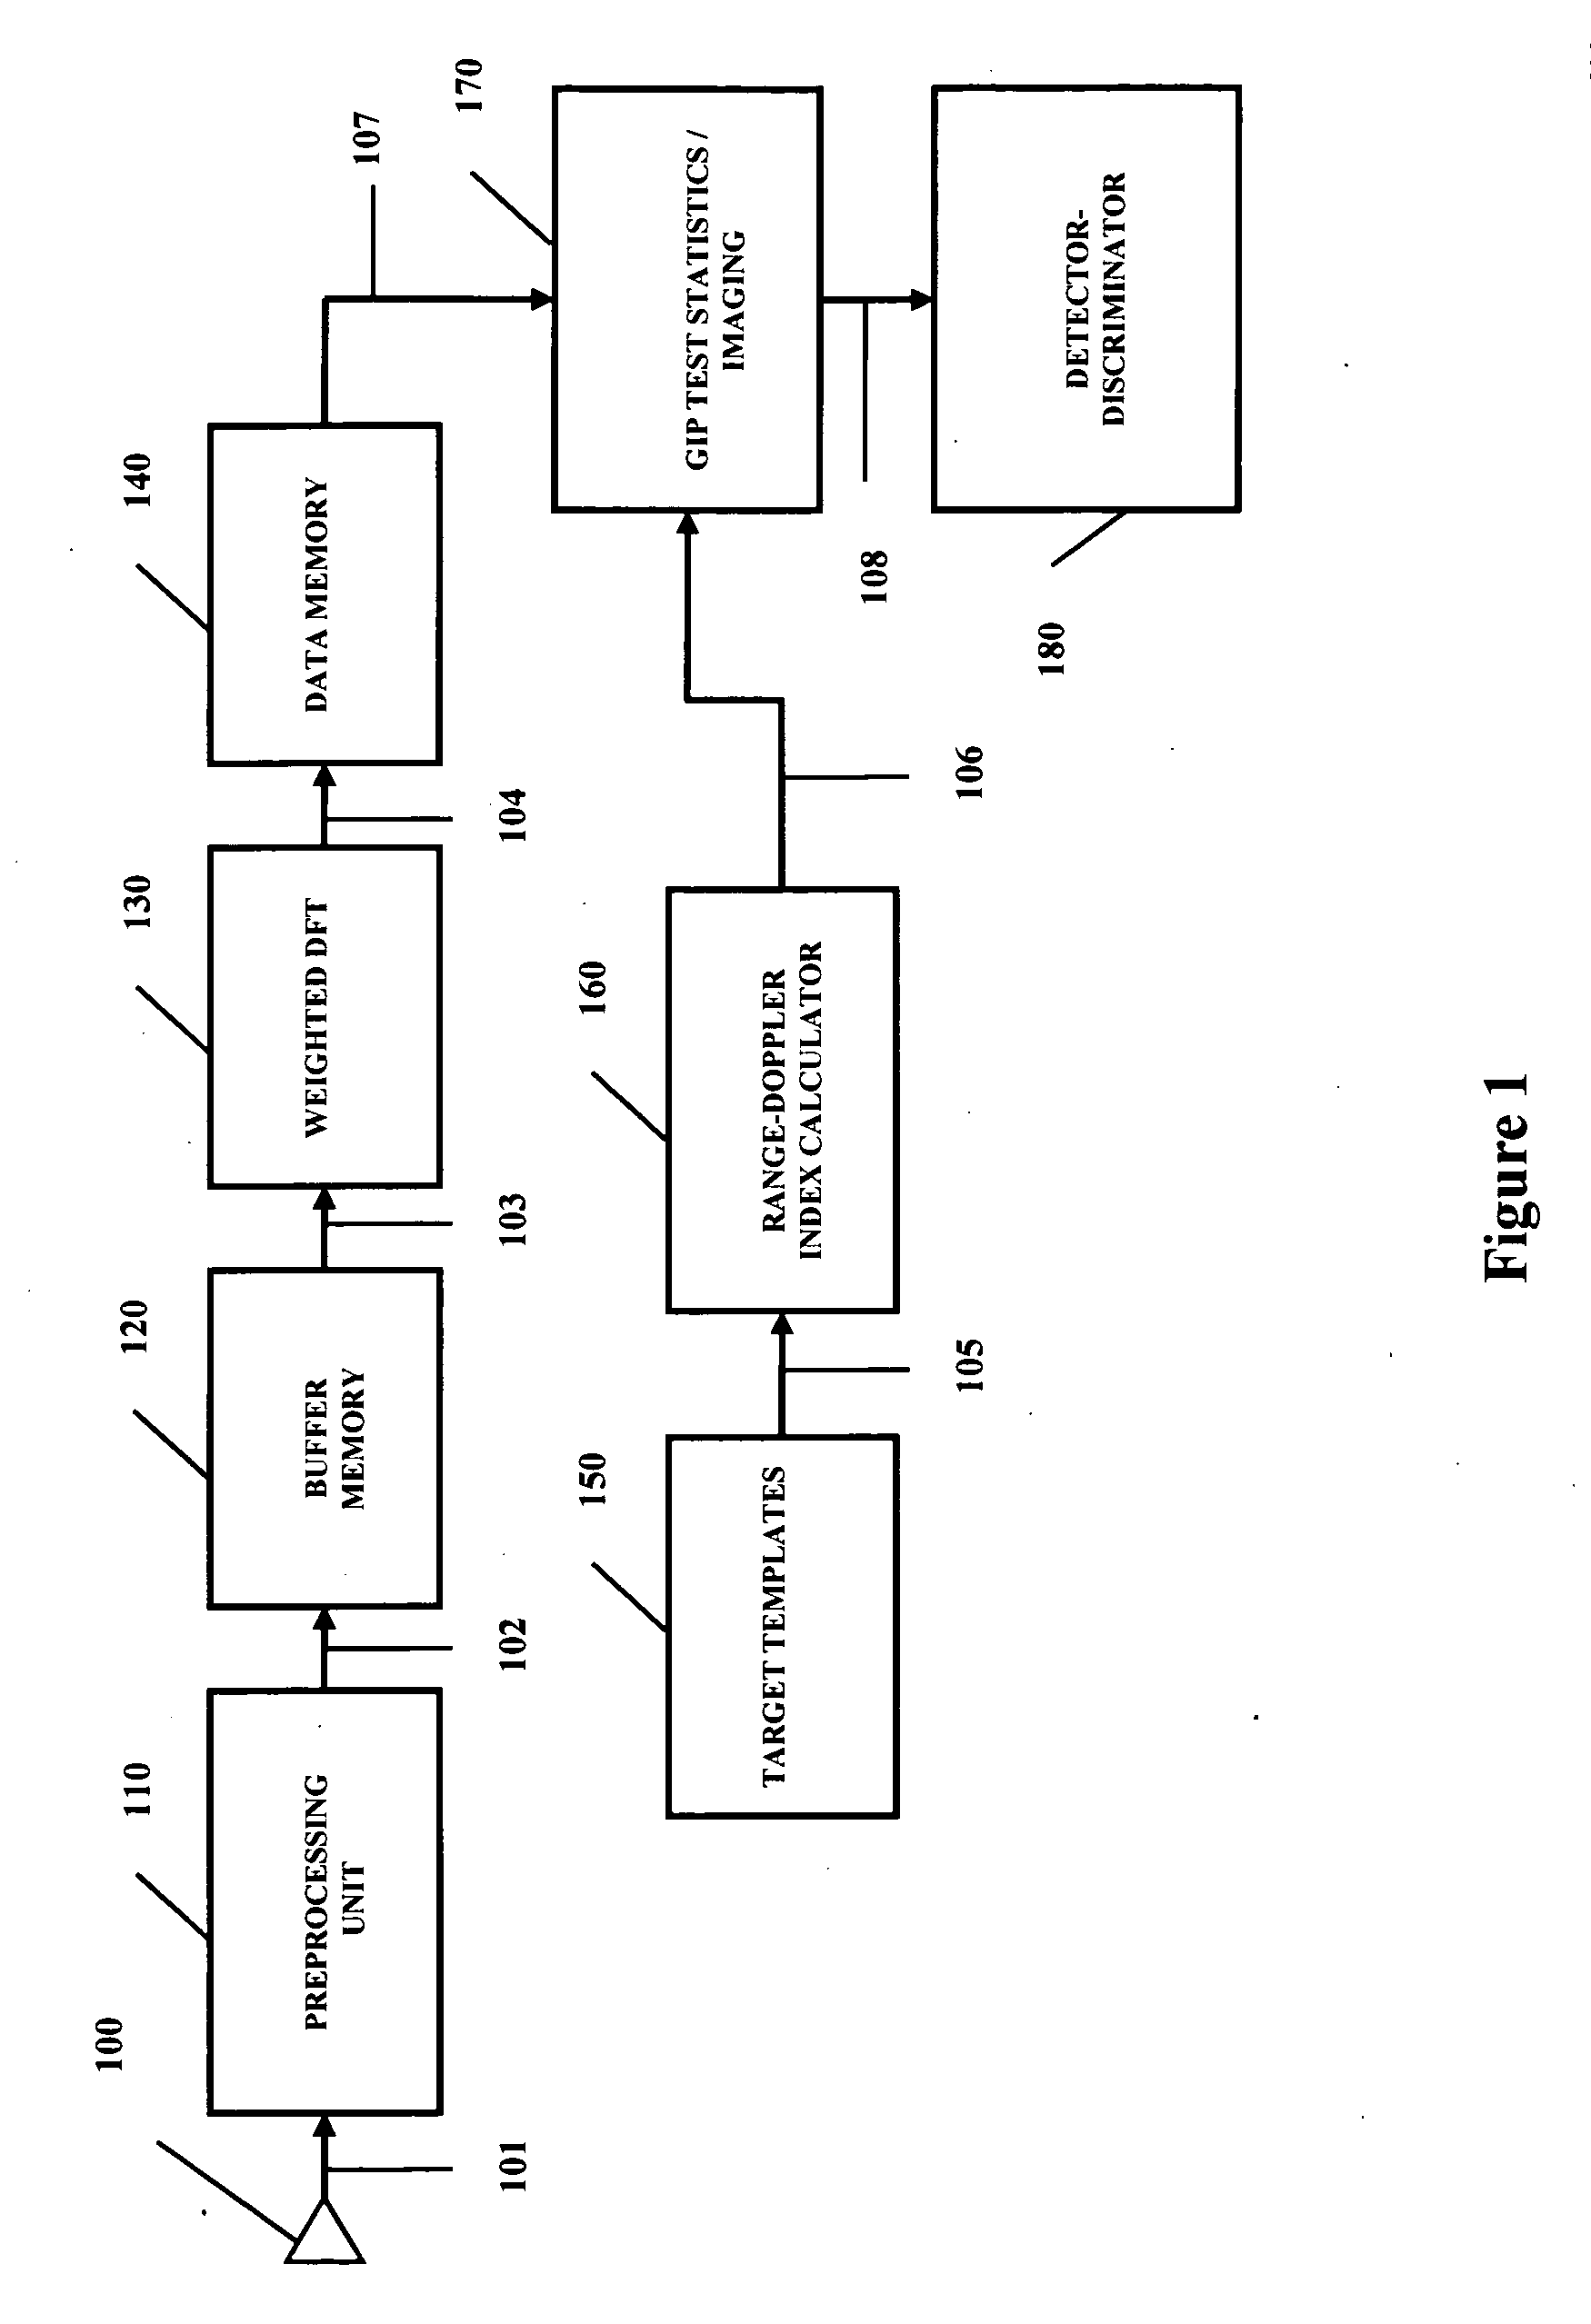 Generalized inner product method and apparatus for improved detection and discrimination